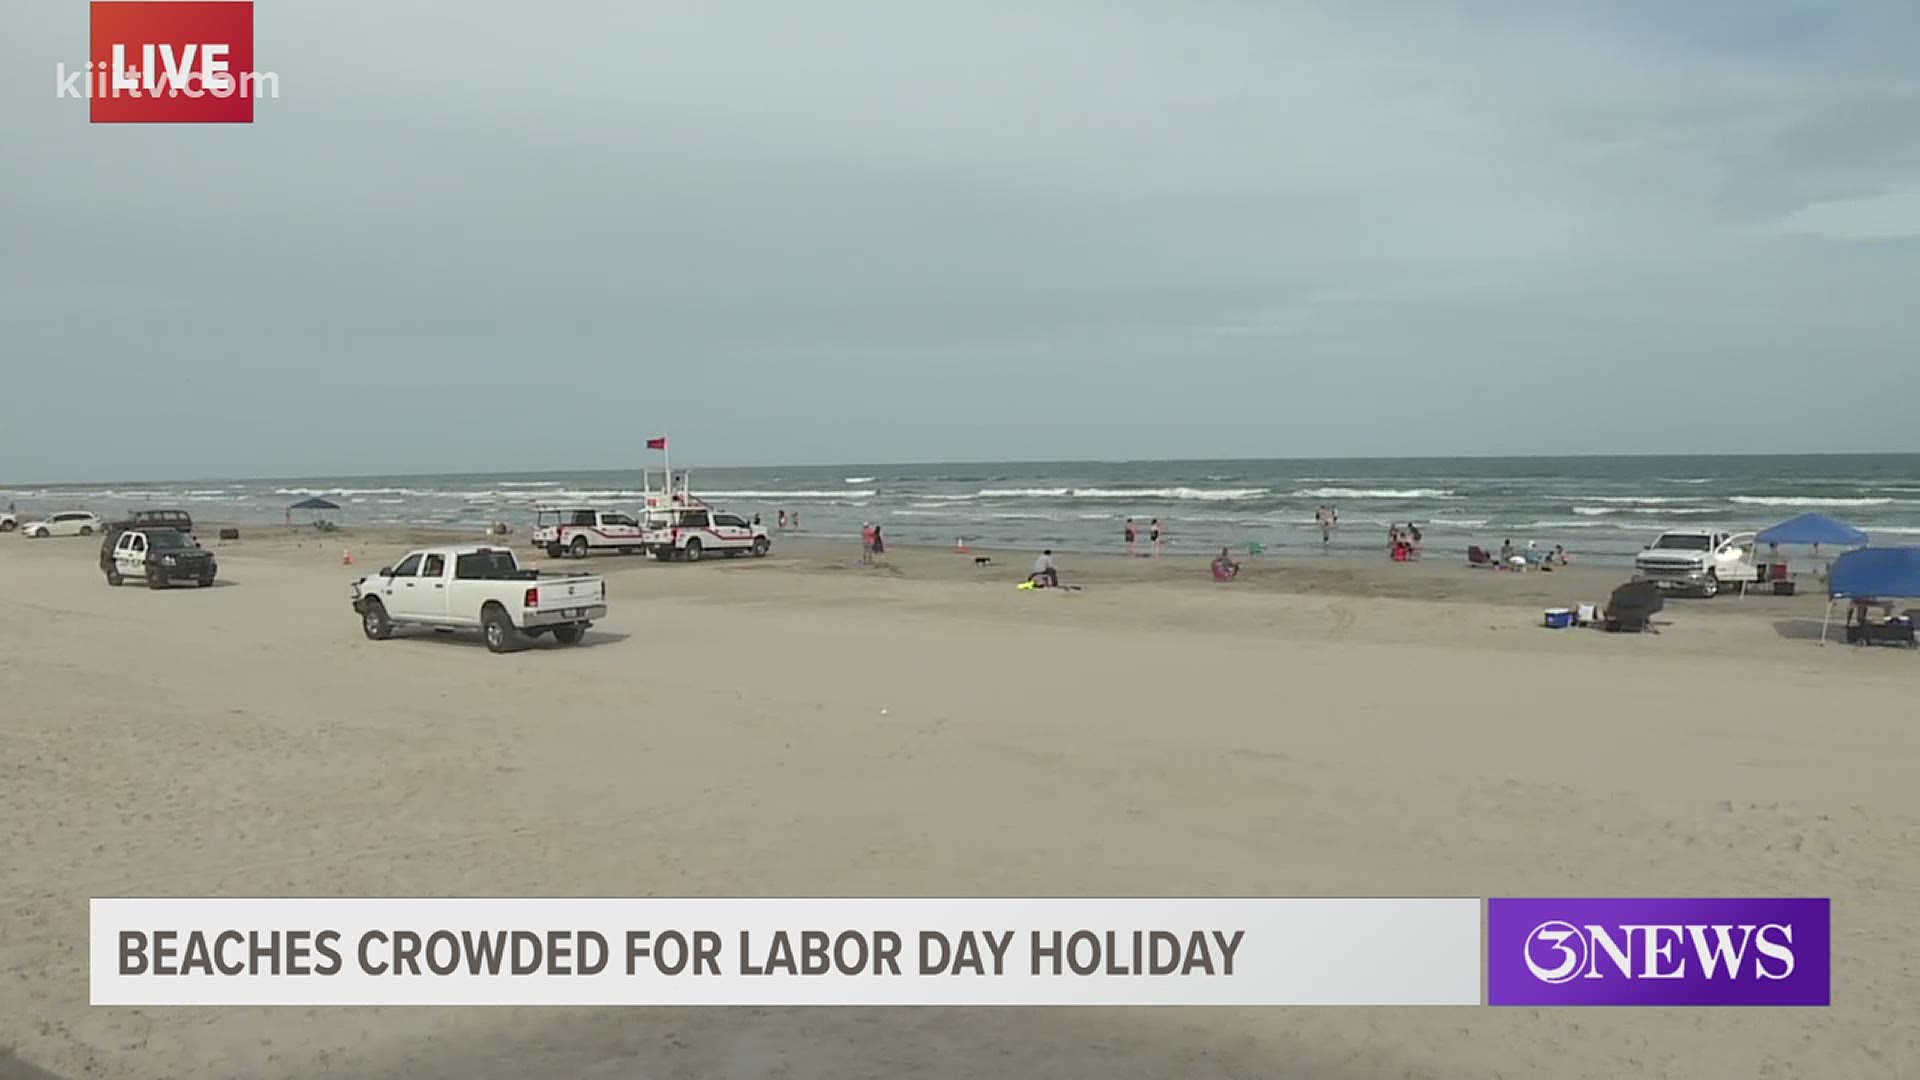 3News Bill Churchwell reports from the local beaches with a look at how residents are celebrating the holiday.